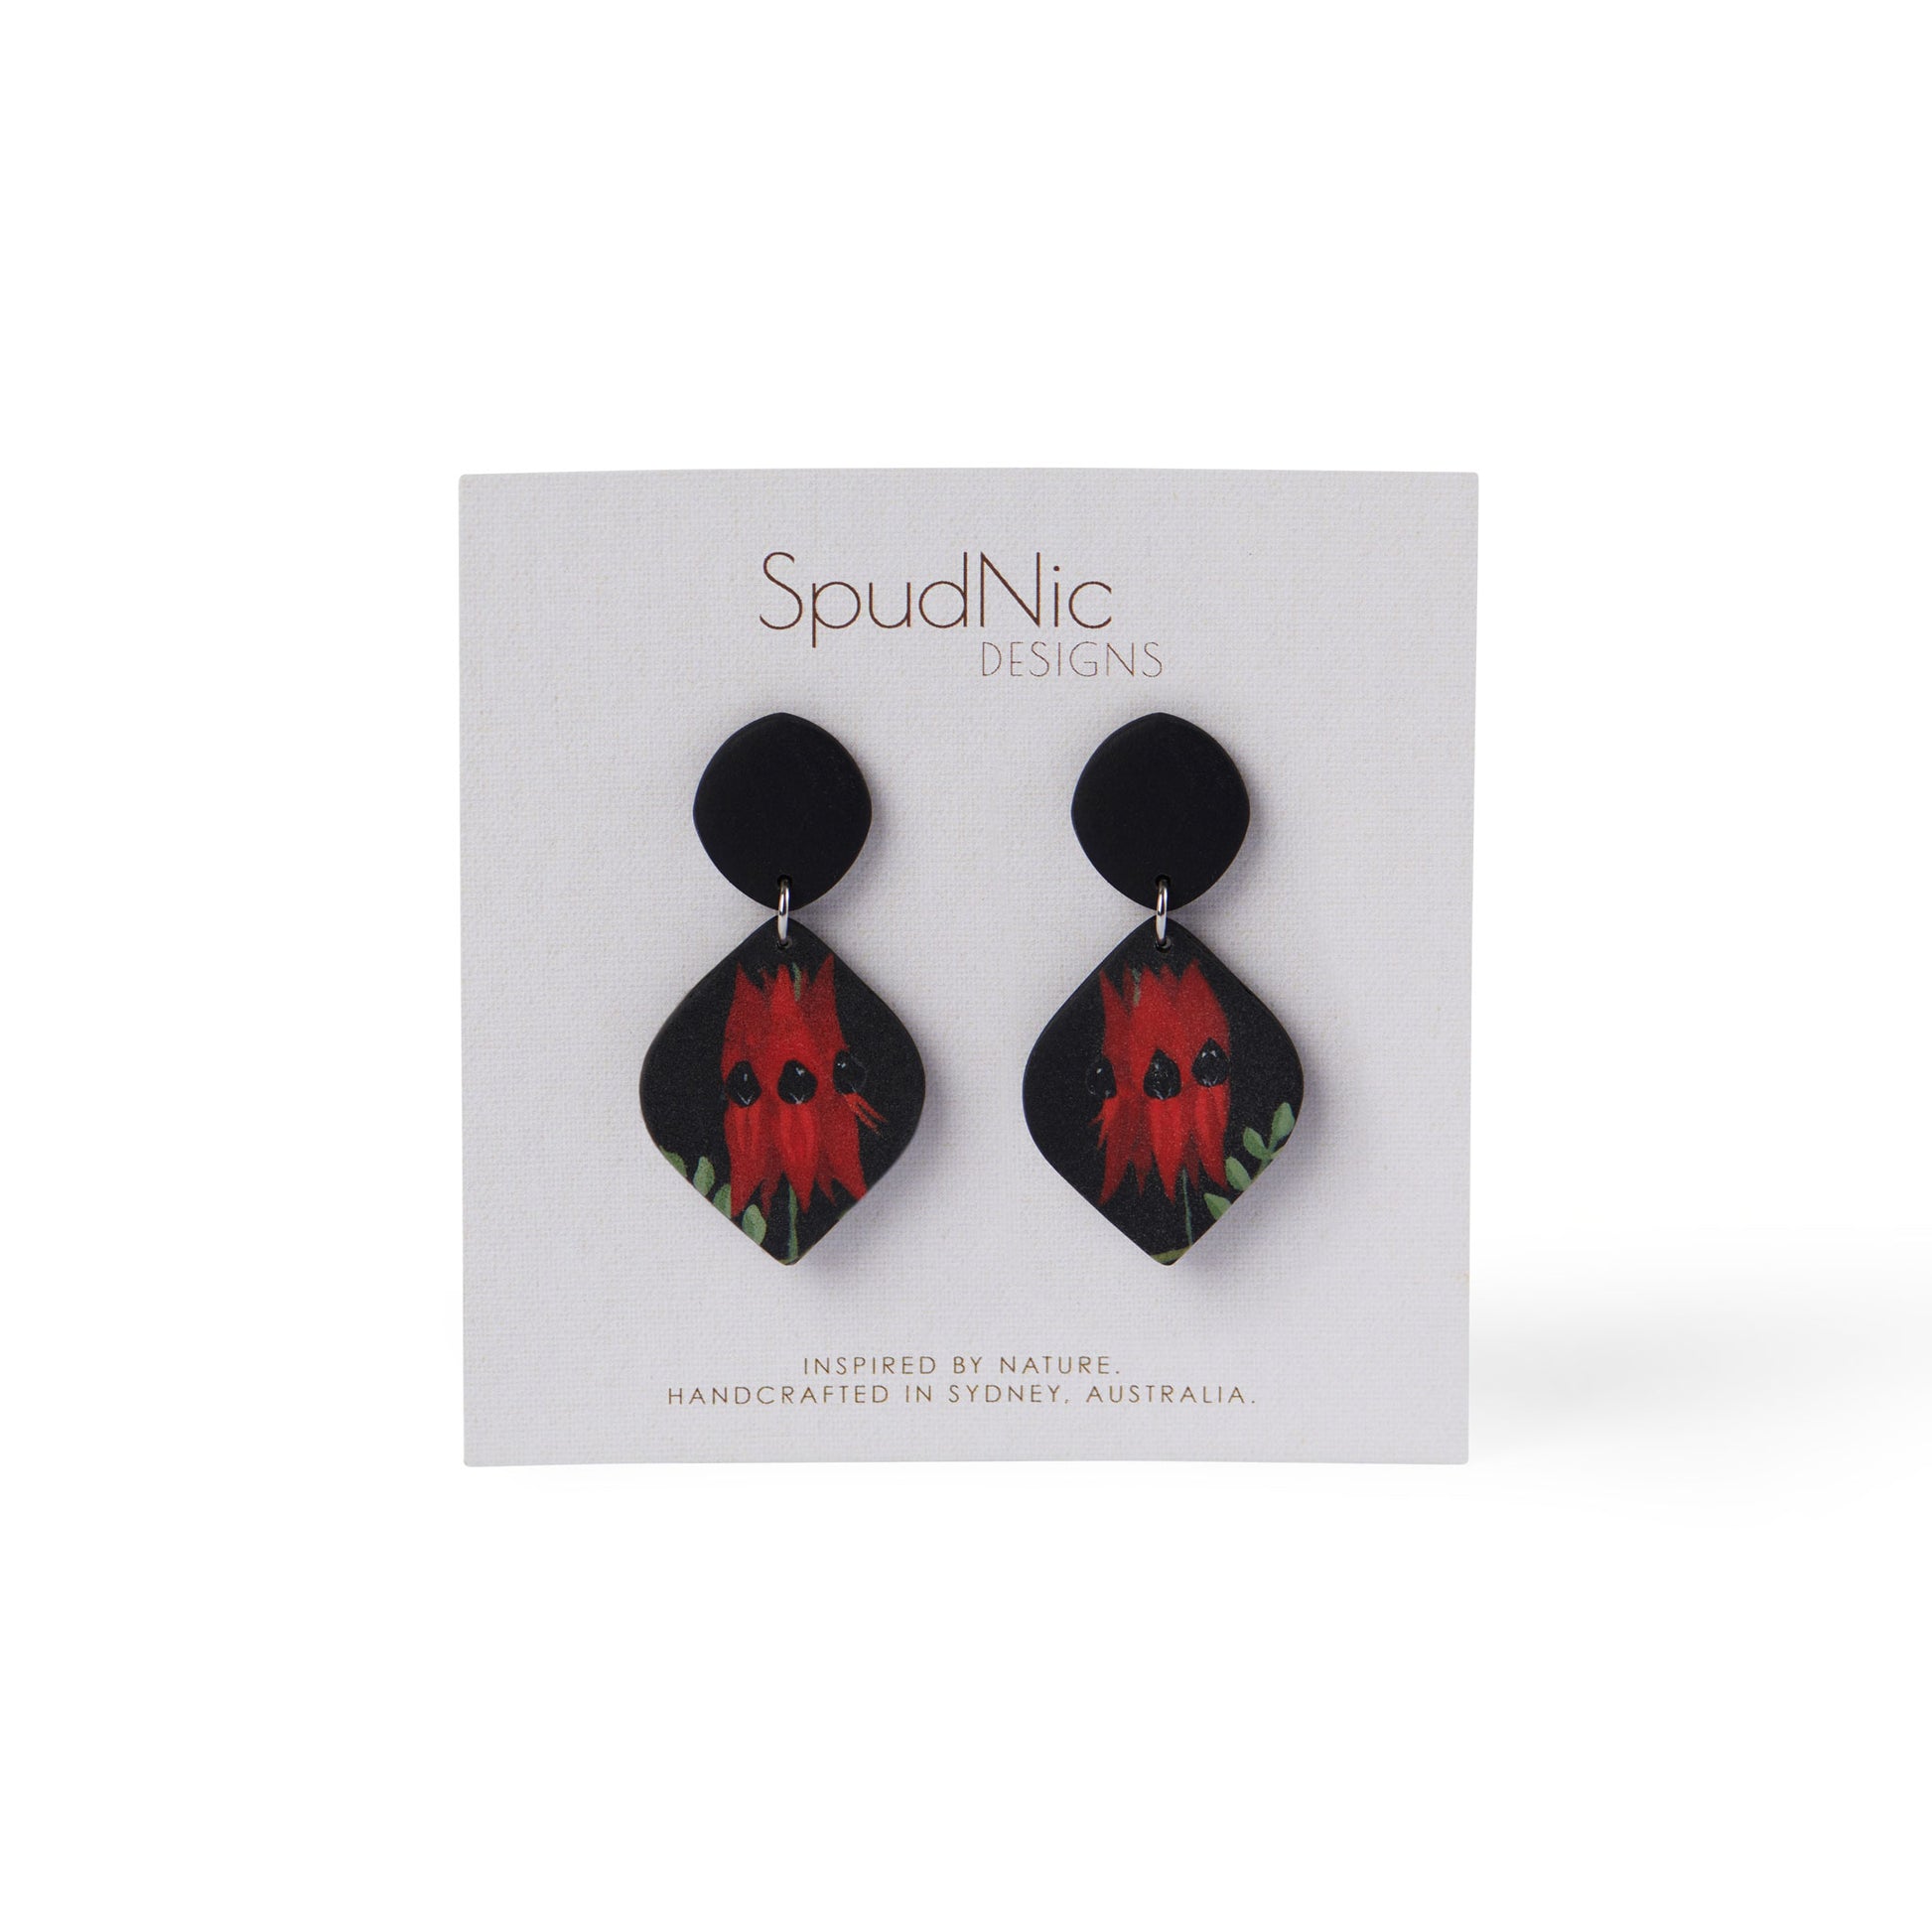 These beautifully handmade statement earrings showcase one of Australia's most unique native plants, the Sturt's Desert Pea.